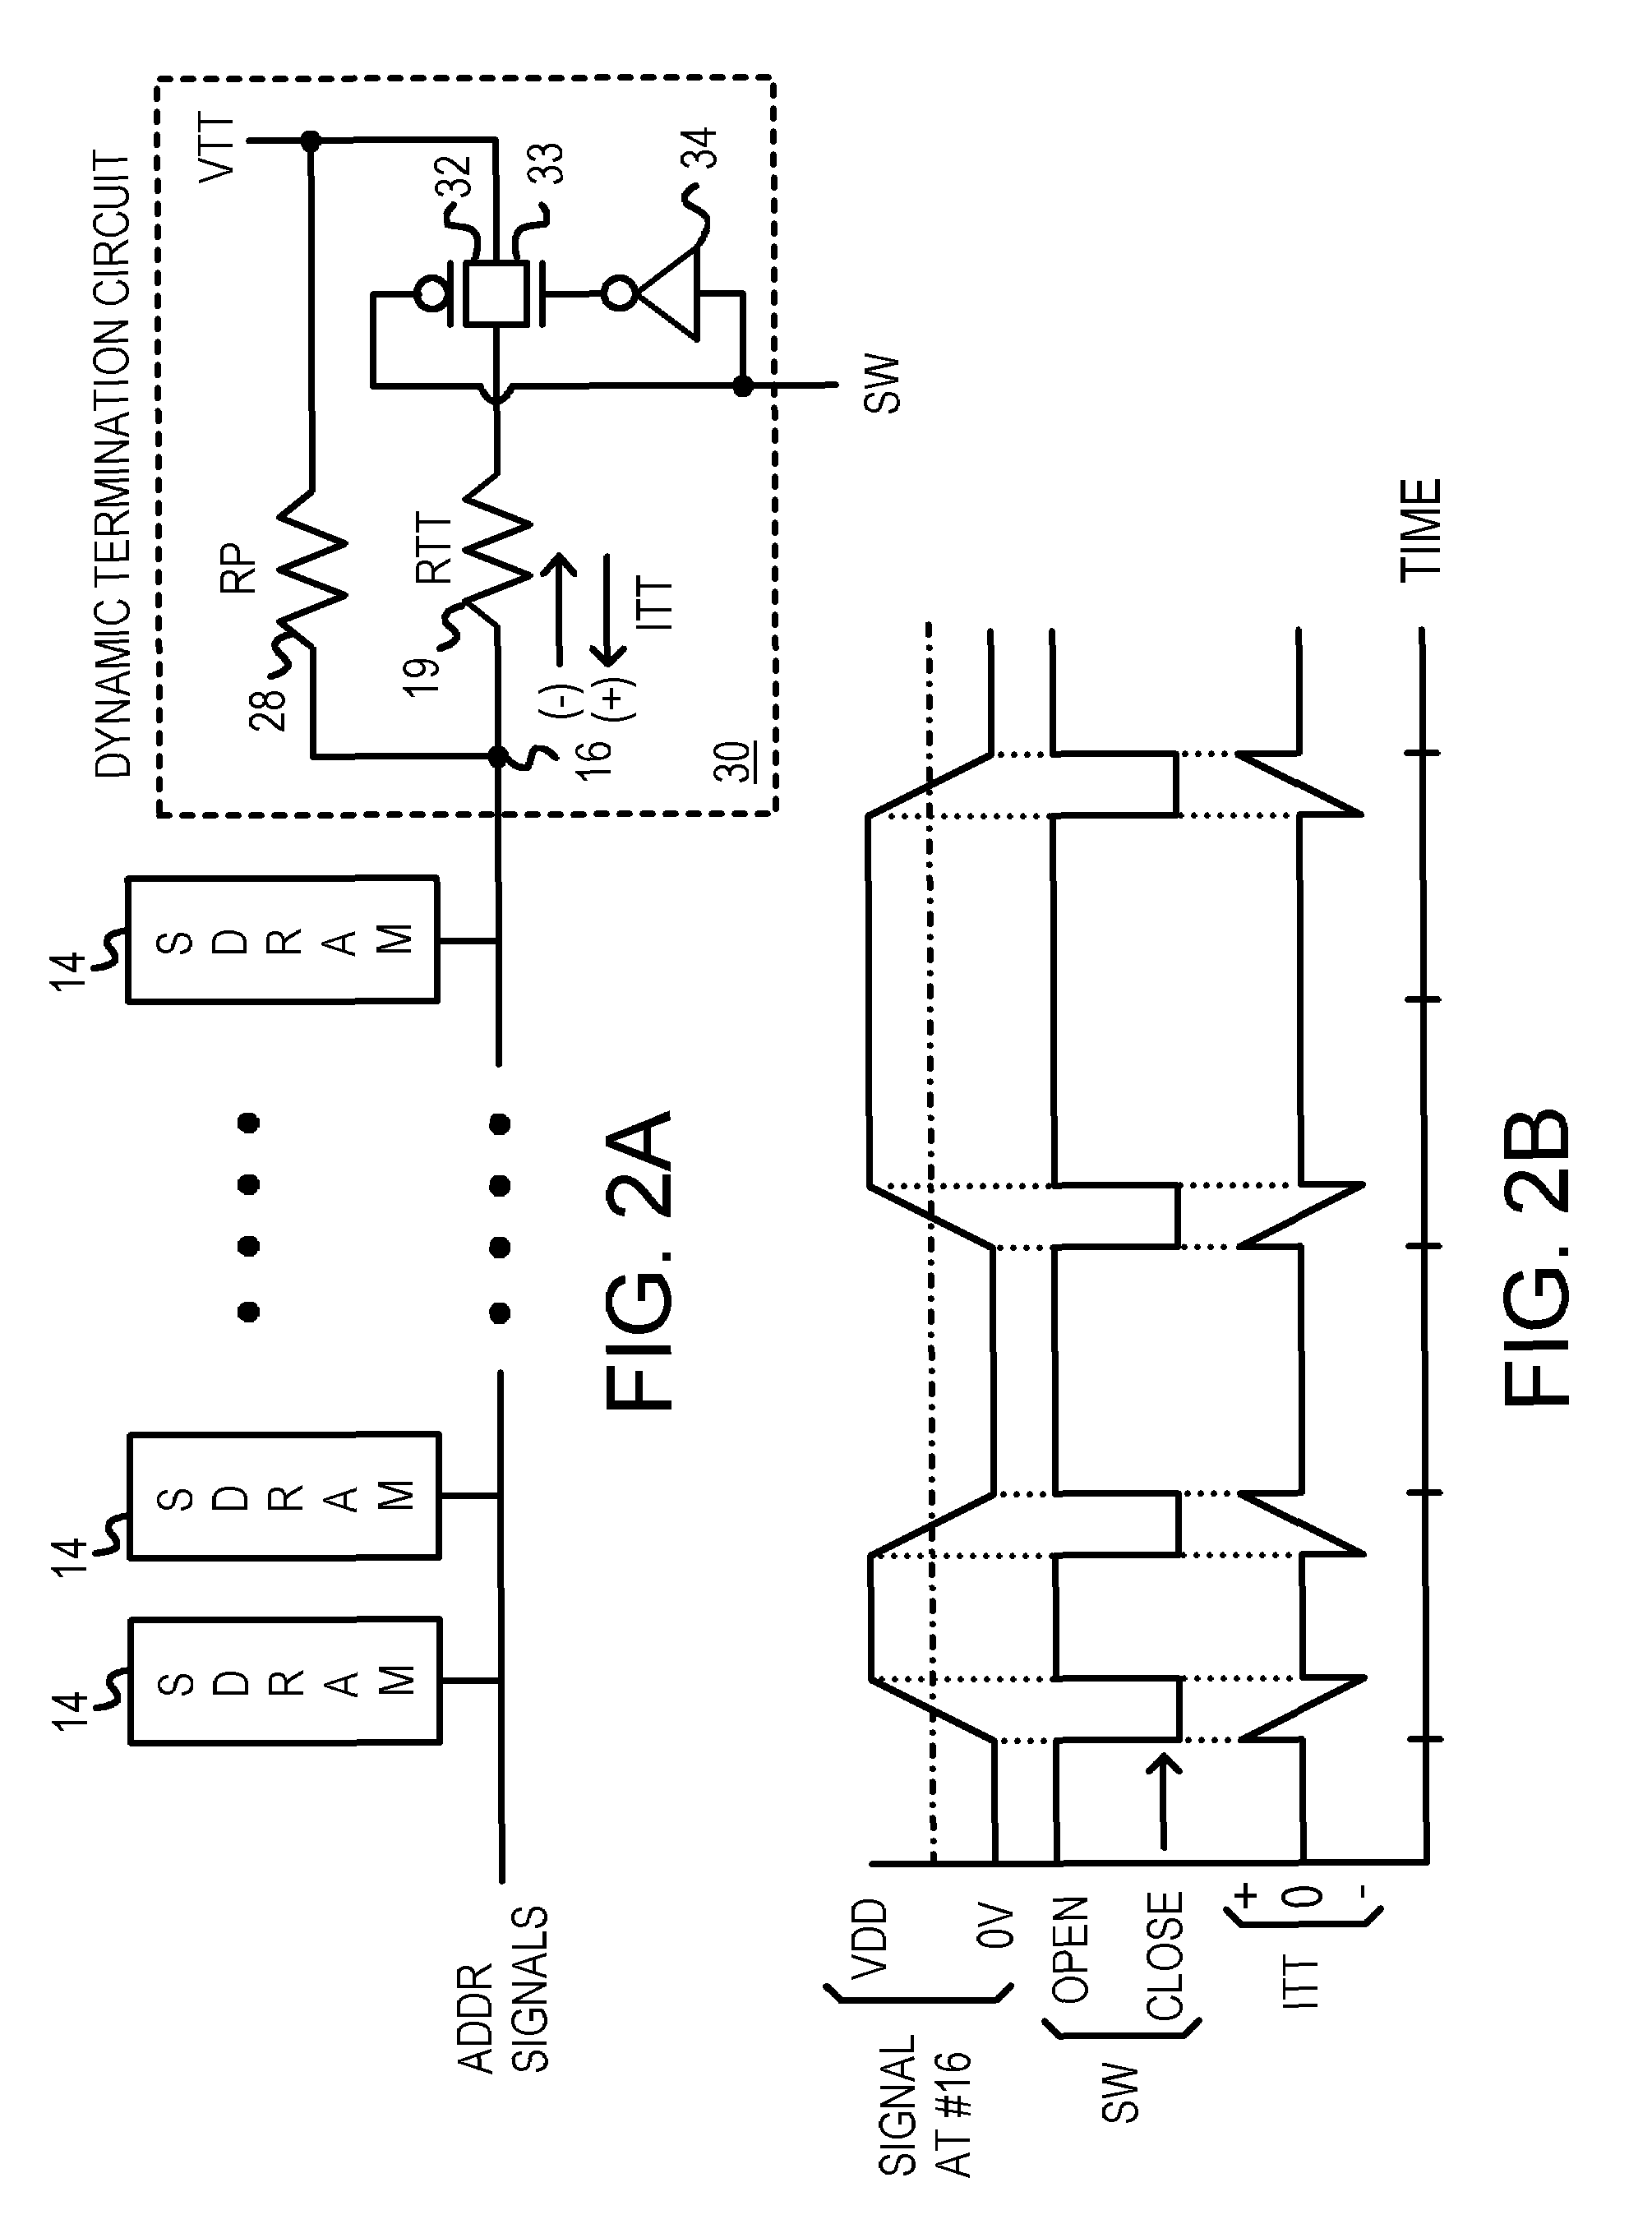 Memory module with dynamic termination using bus switches timed by memory clock and chip select